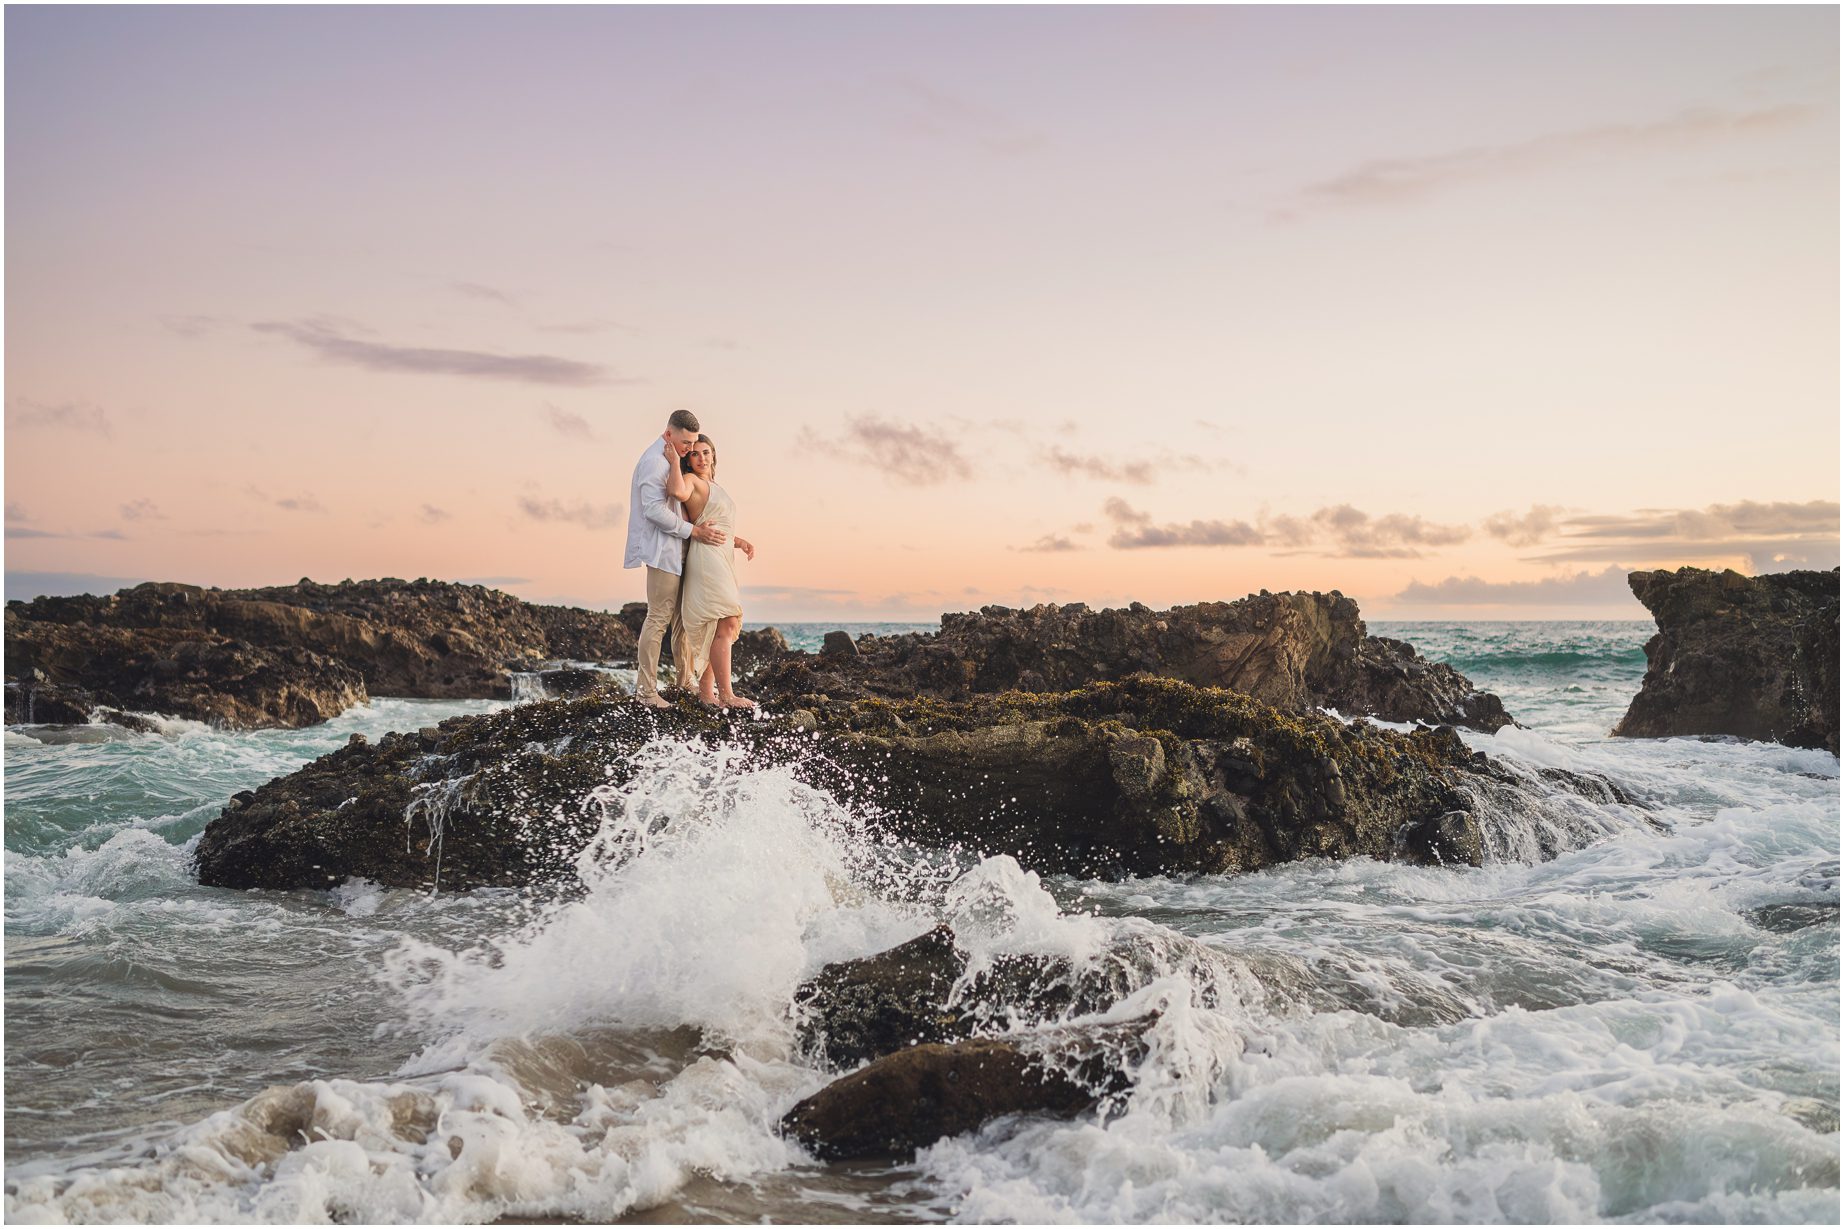 Kendall & Bruce Pose on the rocks for their woods cove engagement session in Laguna Beach